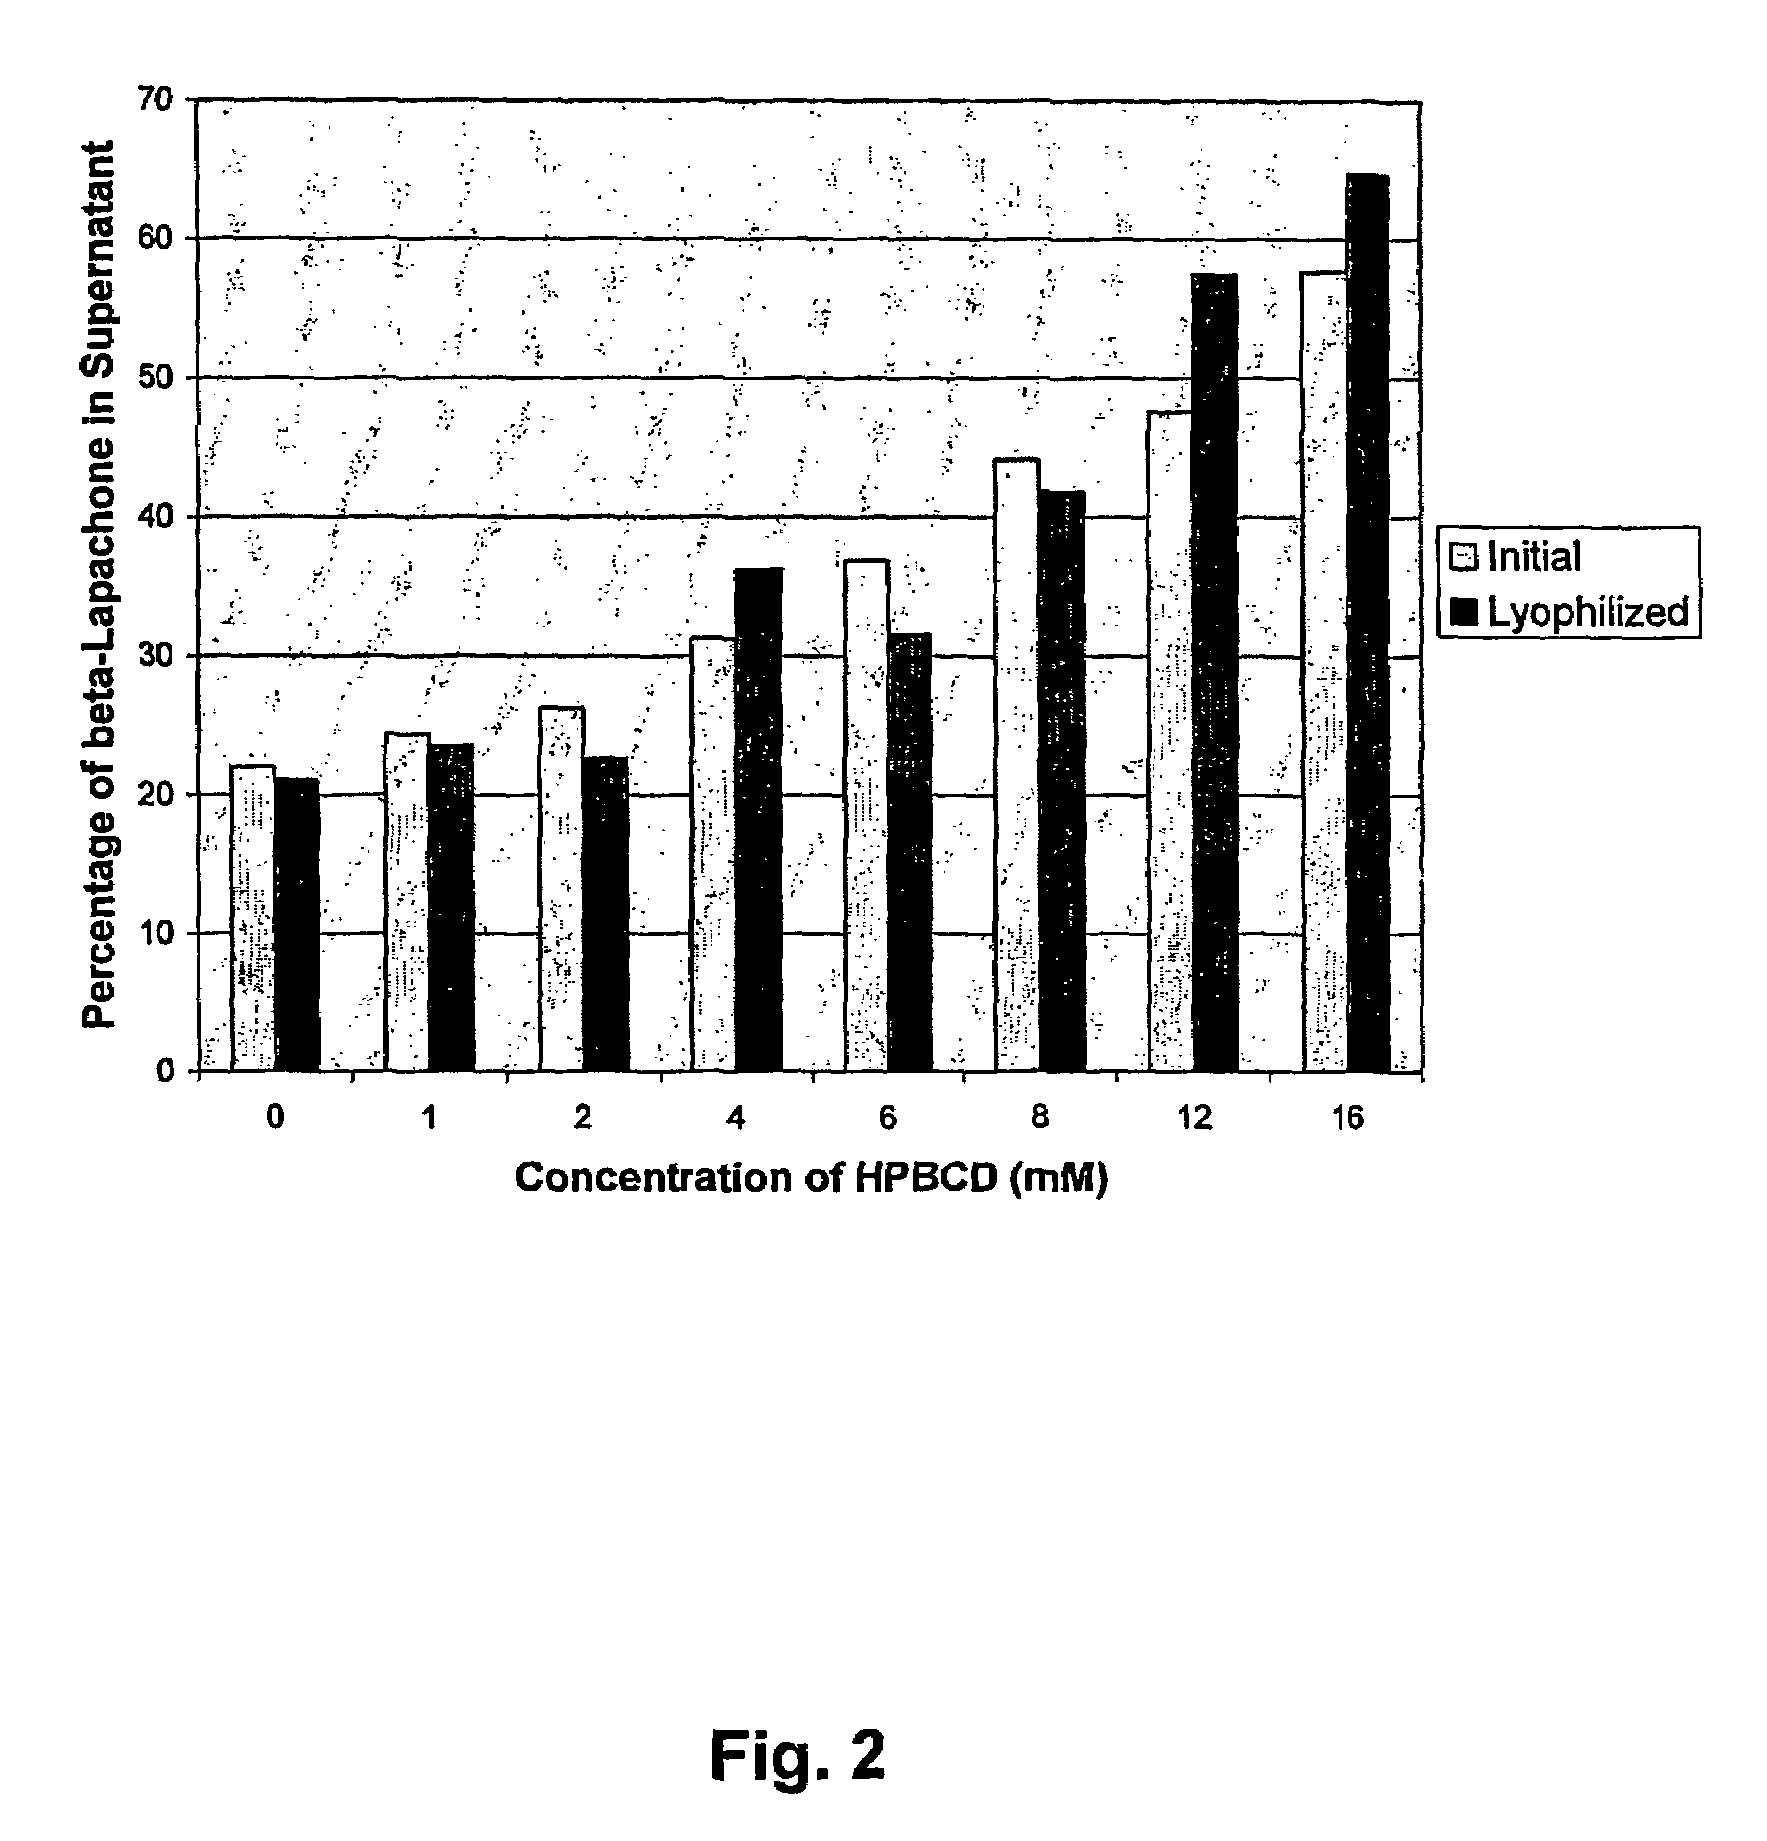 Pharmaceutical compositions containing beta-lapachone, or derivatives or analogs thereof, and methods of using same